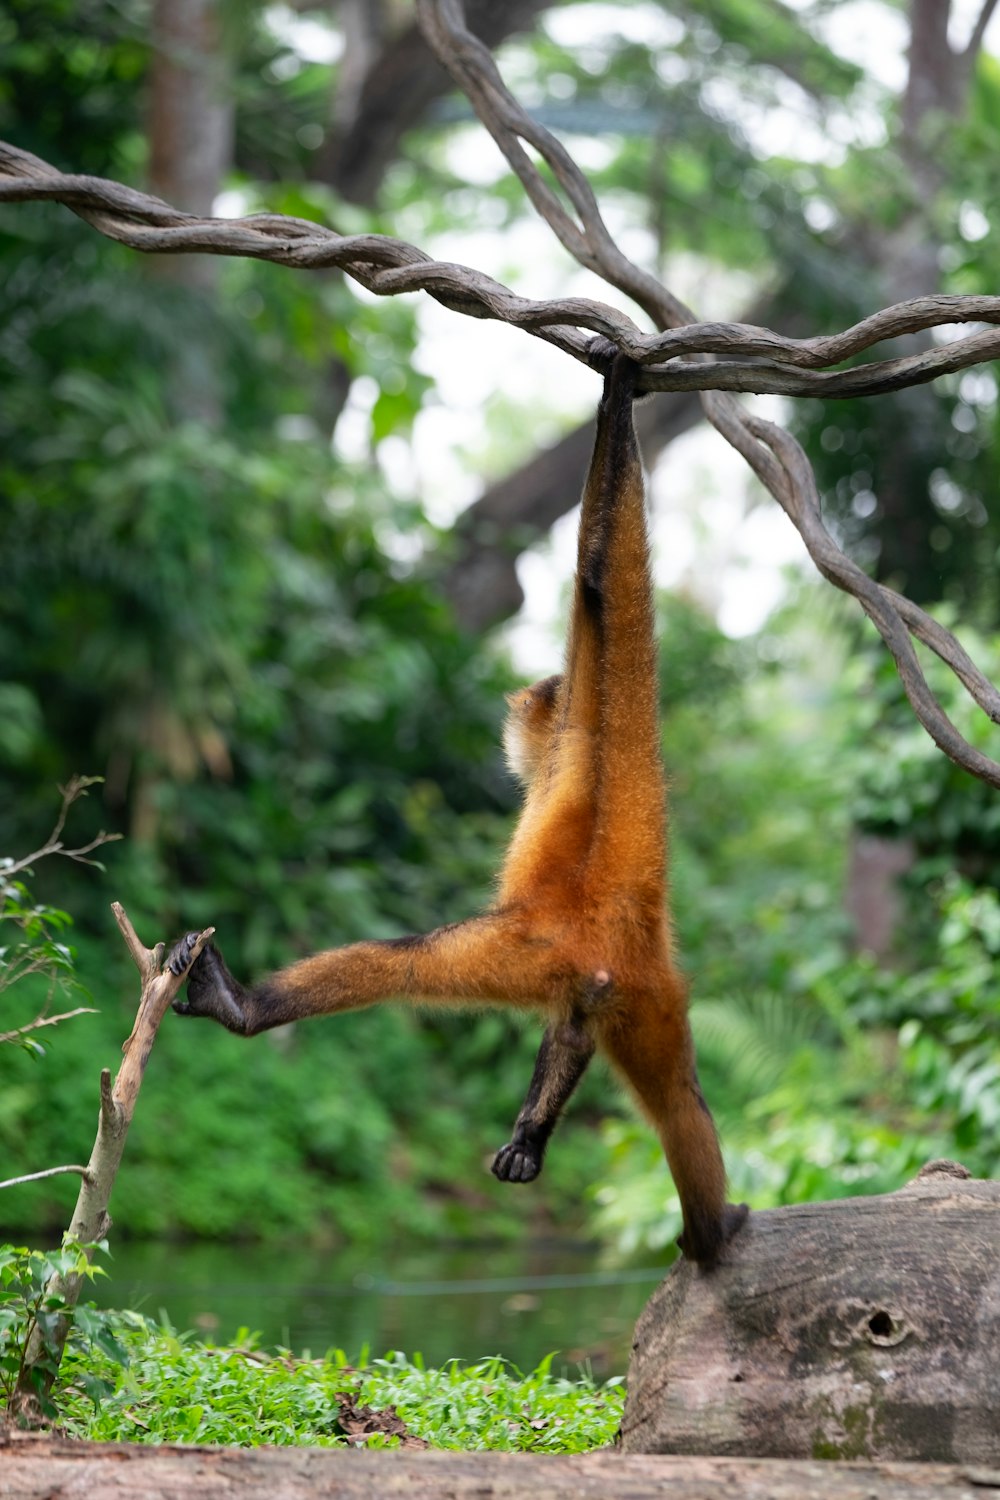 a monkey hanging upside down from a tree branch